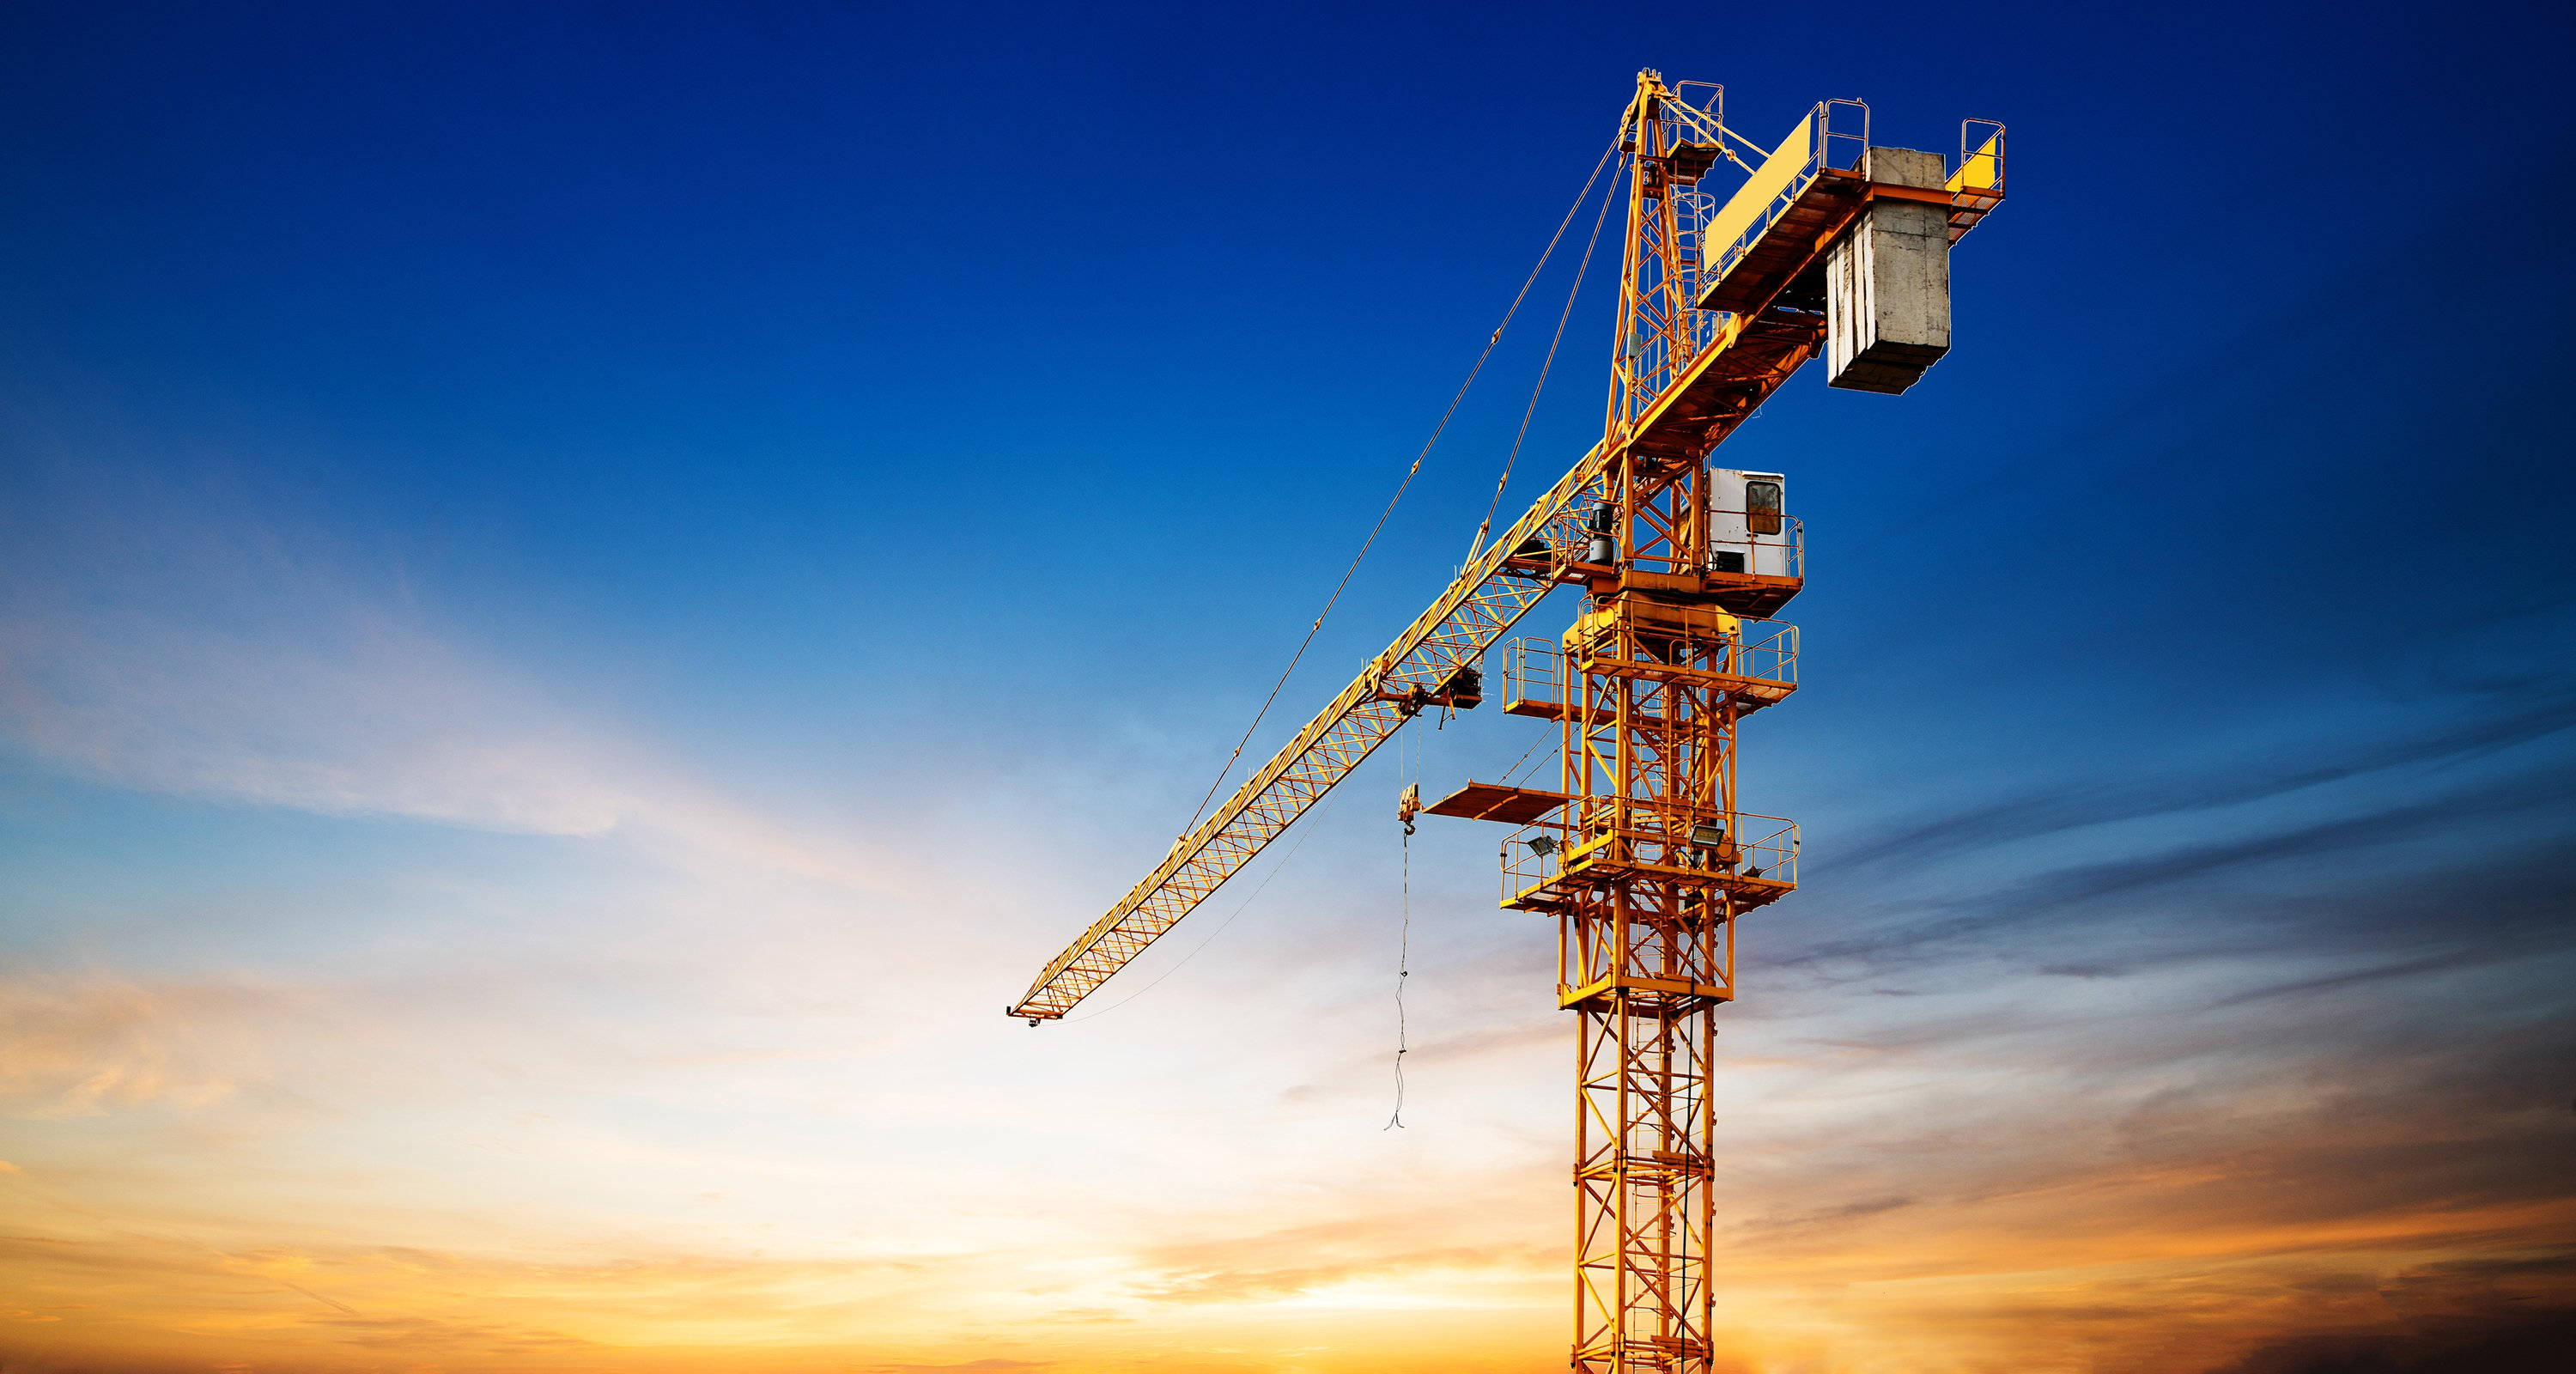 Let ACFM® Do the Heavy Lifting for Crane Inspections